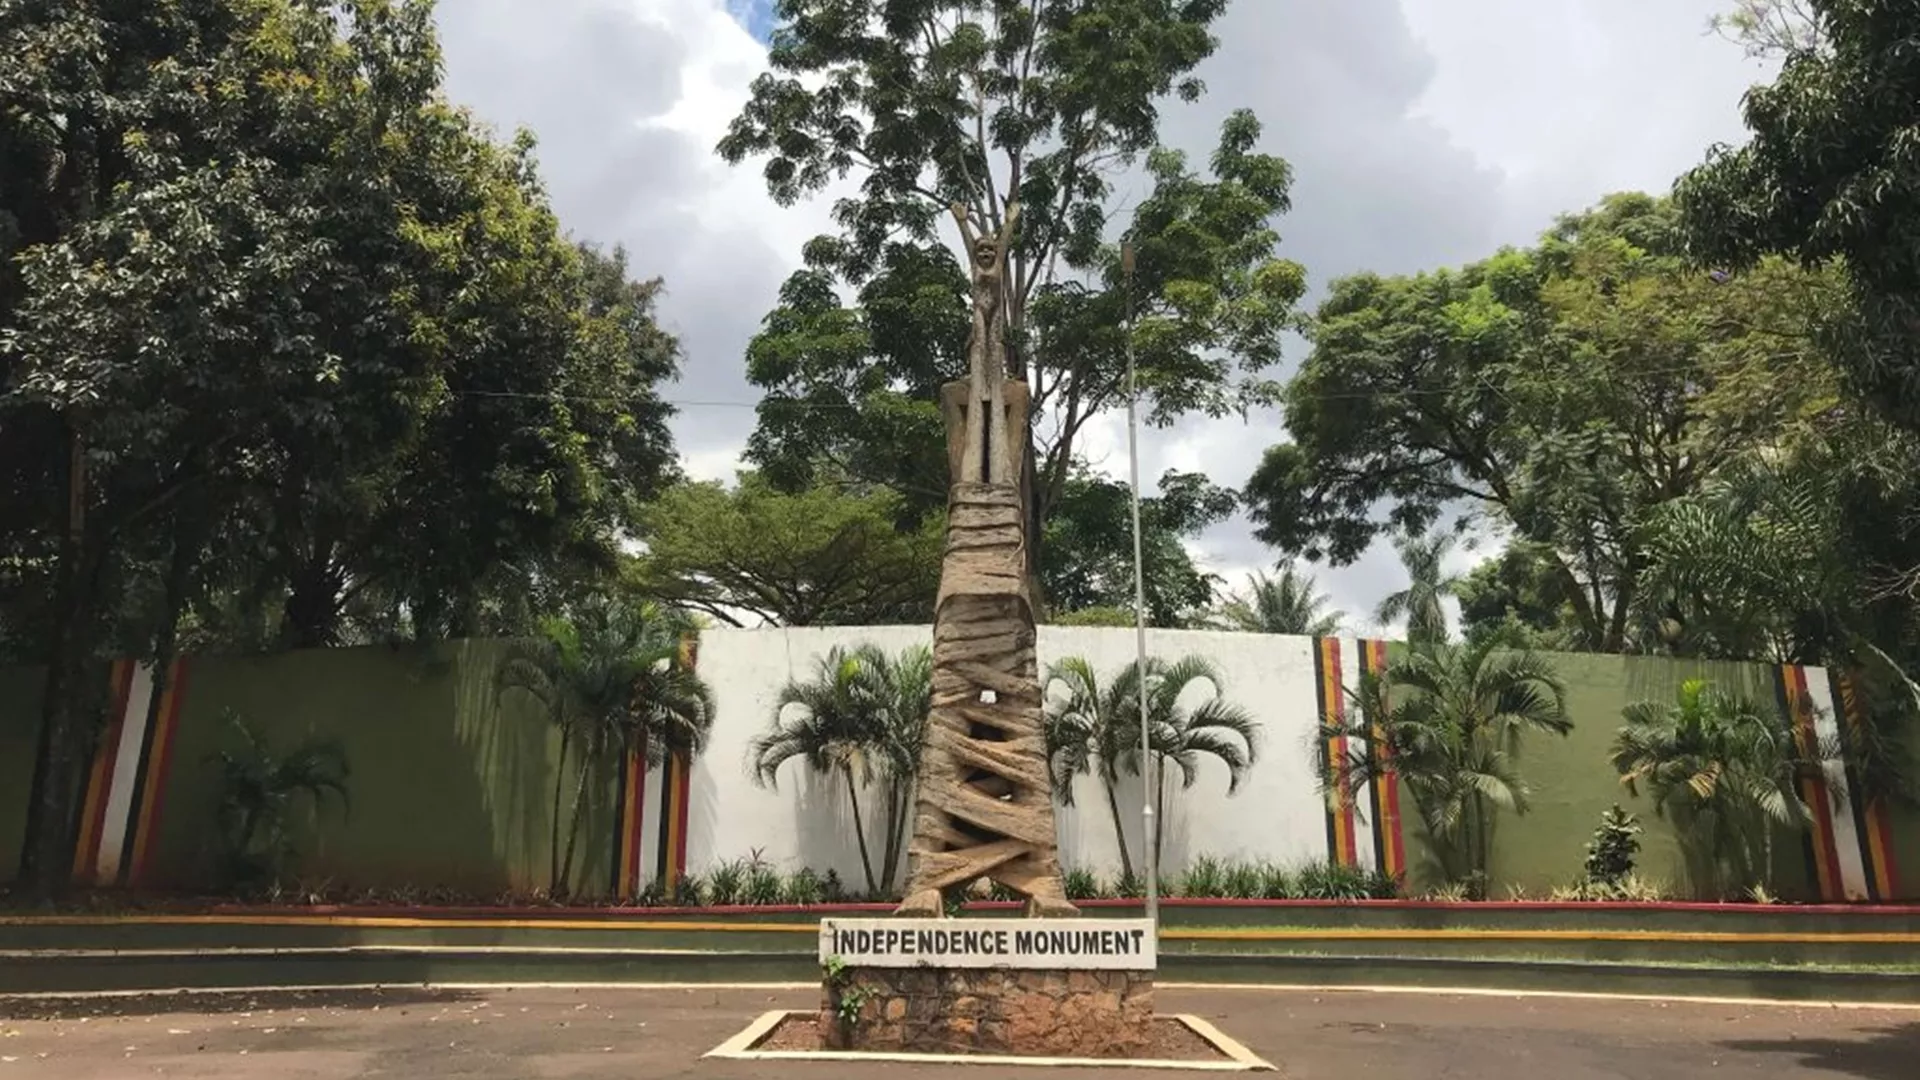 Independence Monument in Uganda, Africa | Monuments - Rated 3.4